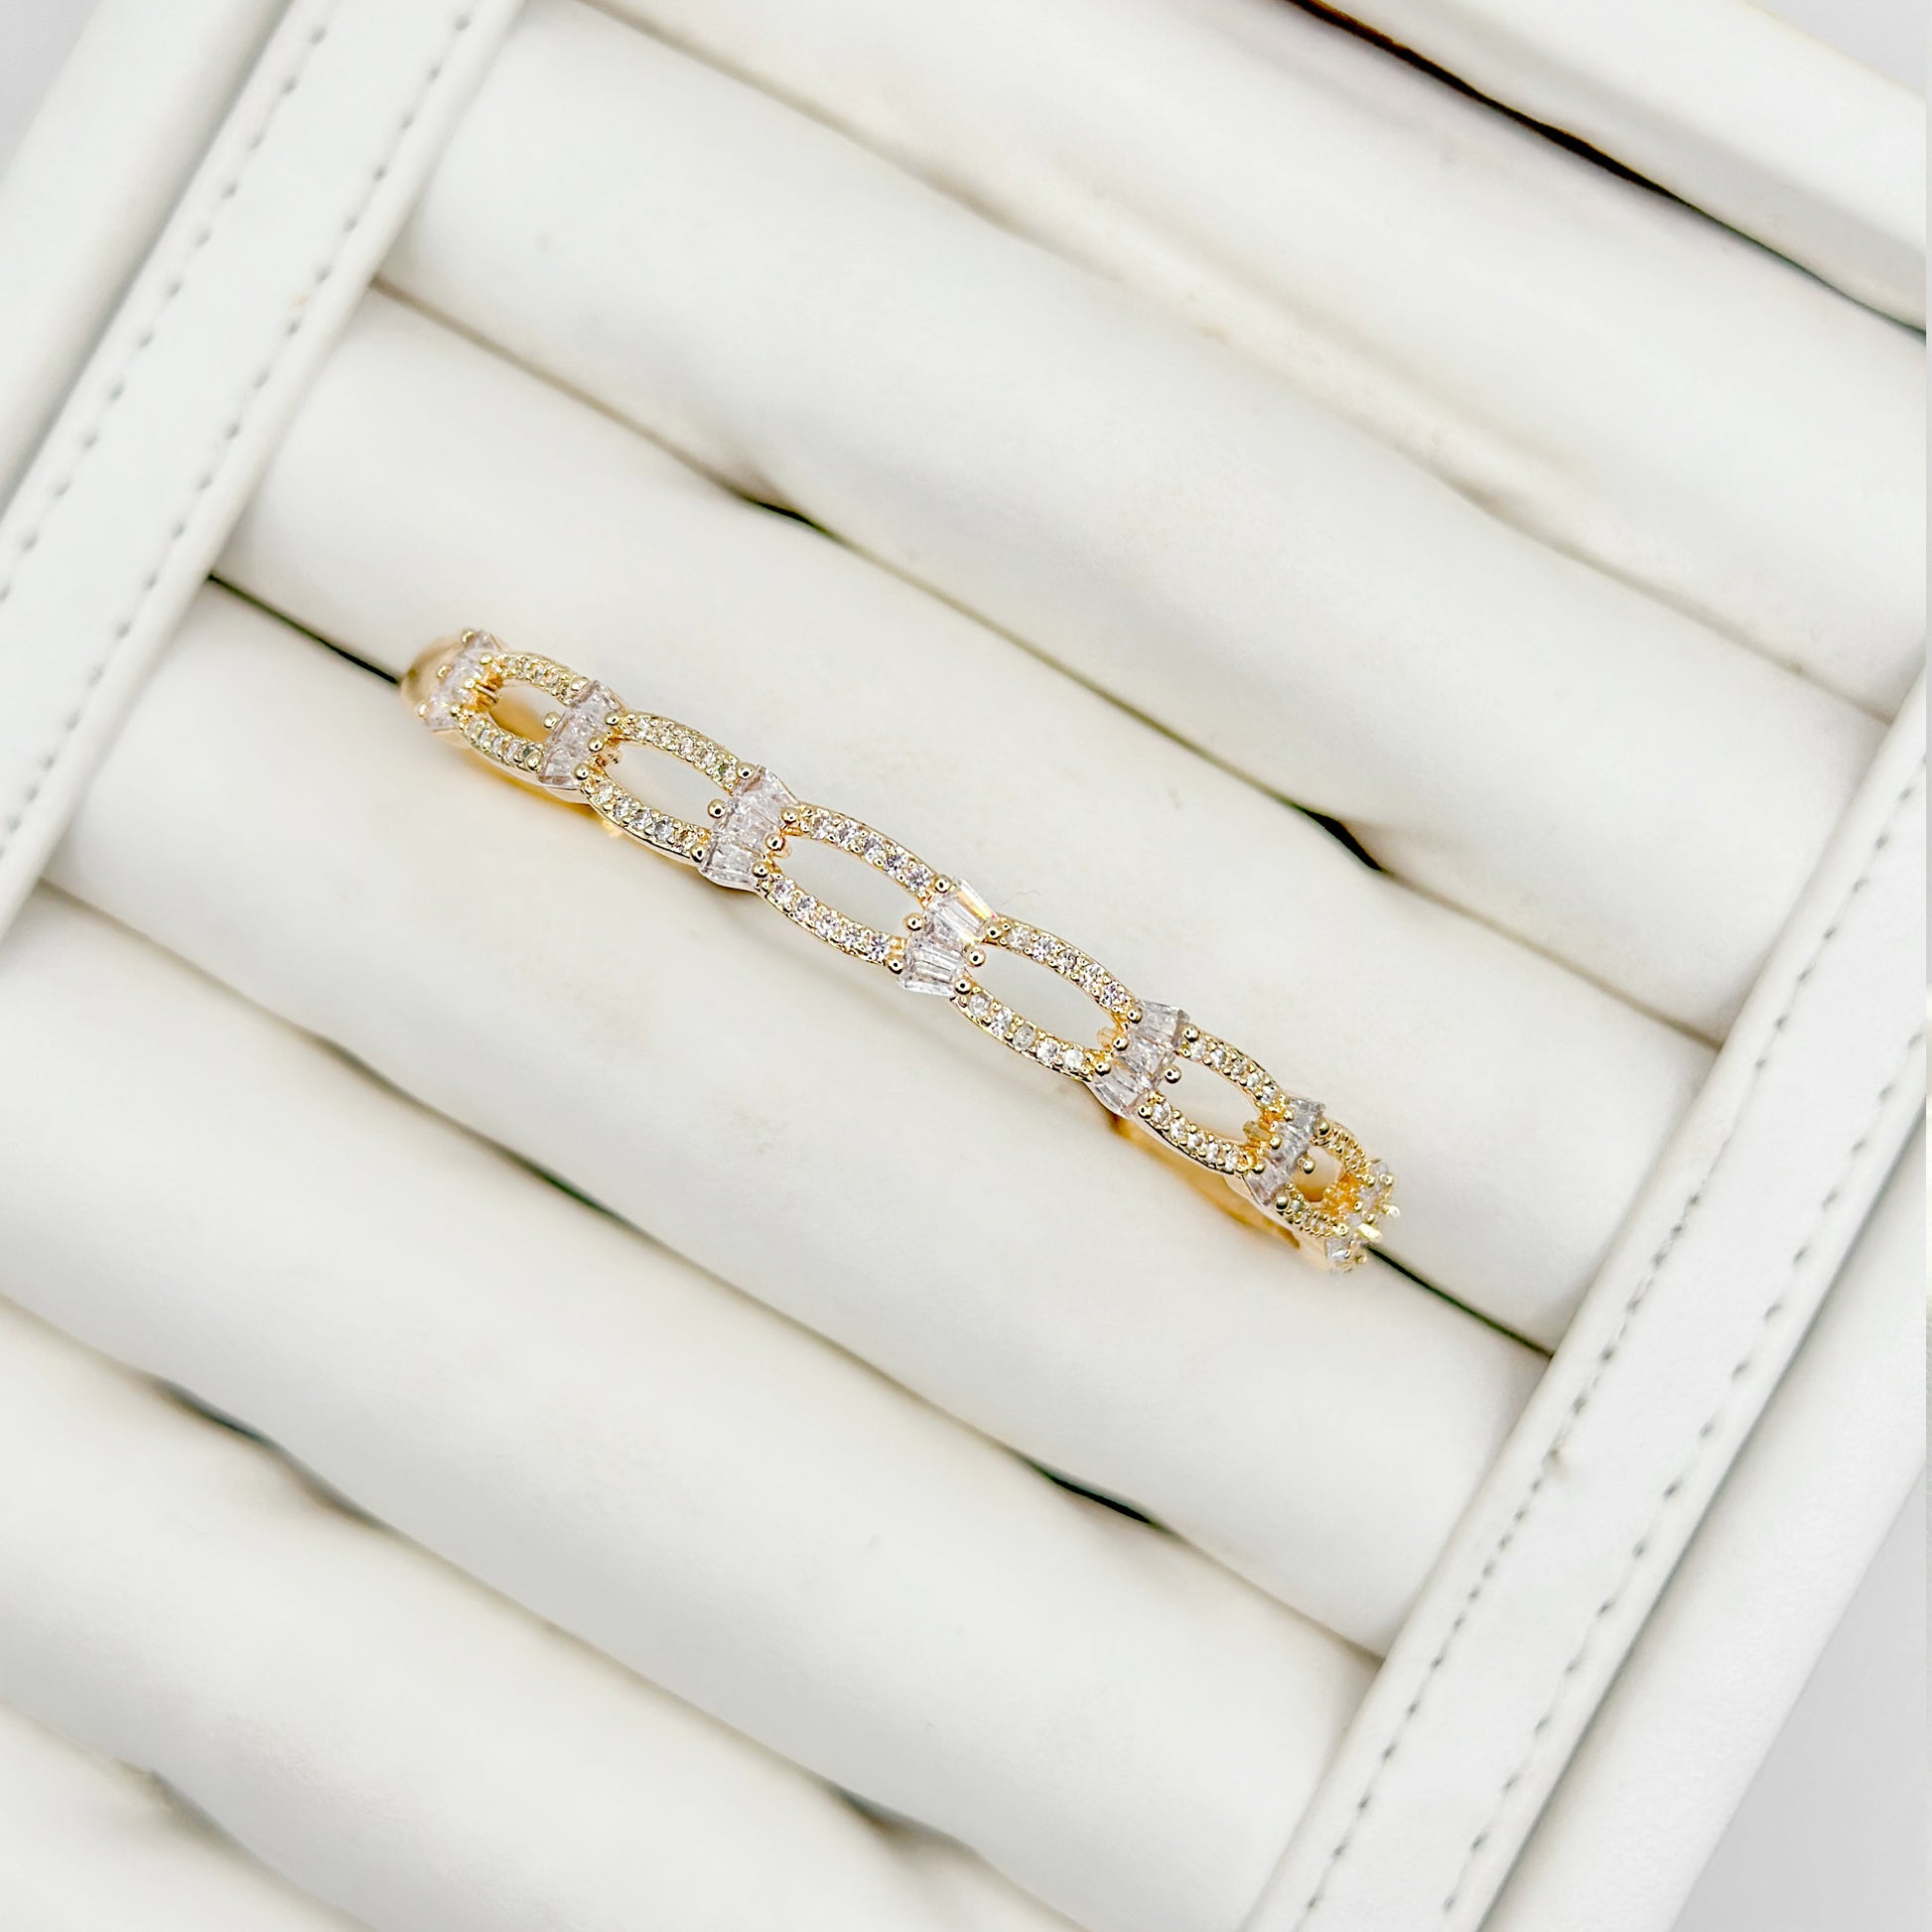 (Attractive Beautiful Zircon Bracelet) shown in close up from Al Musk Jewellery collection.